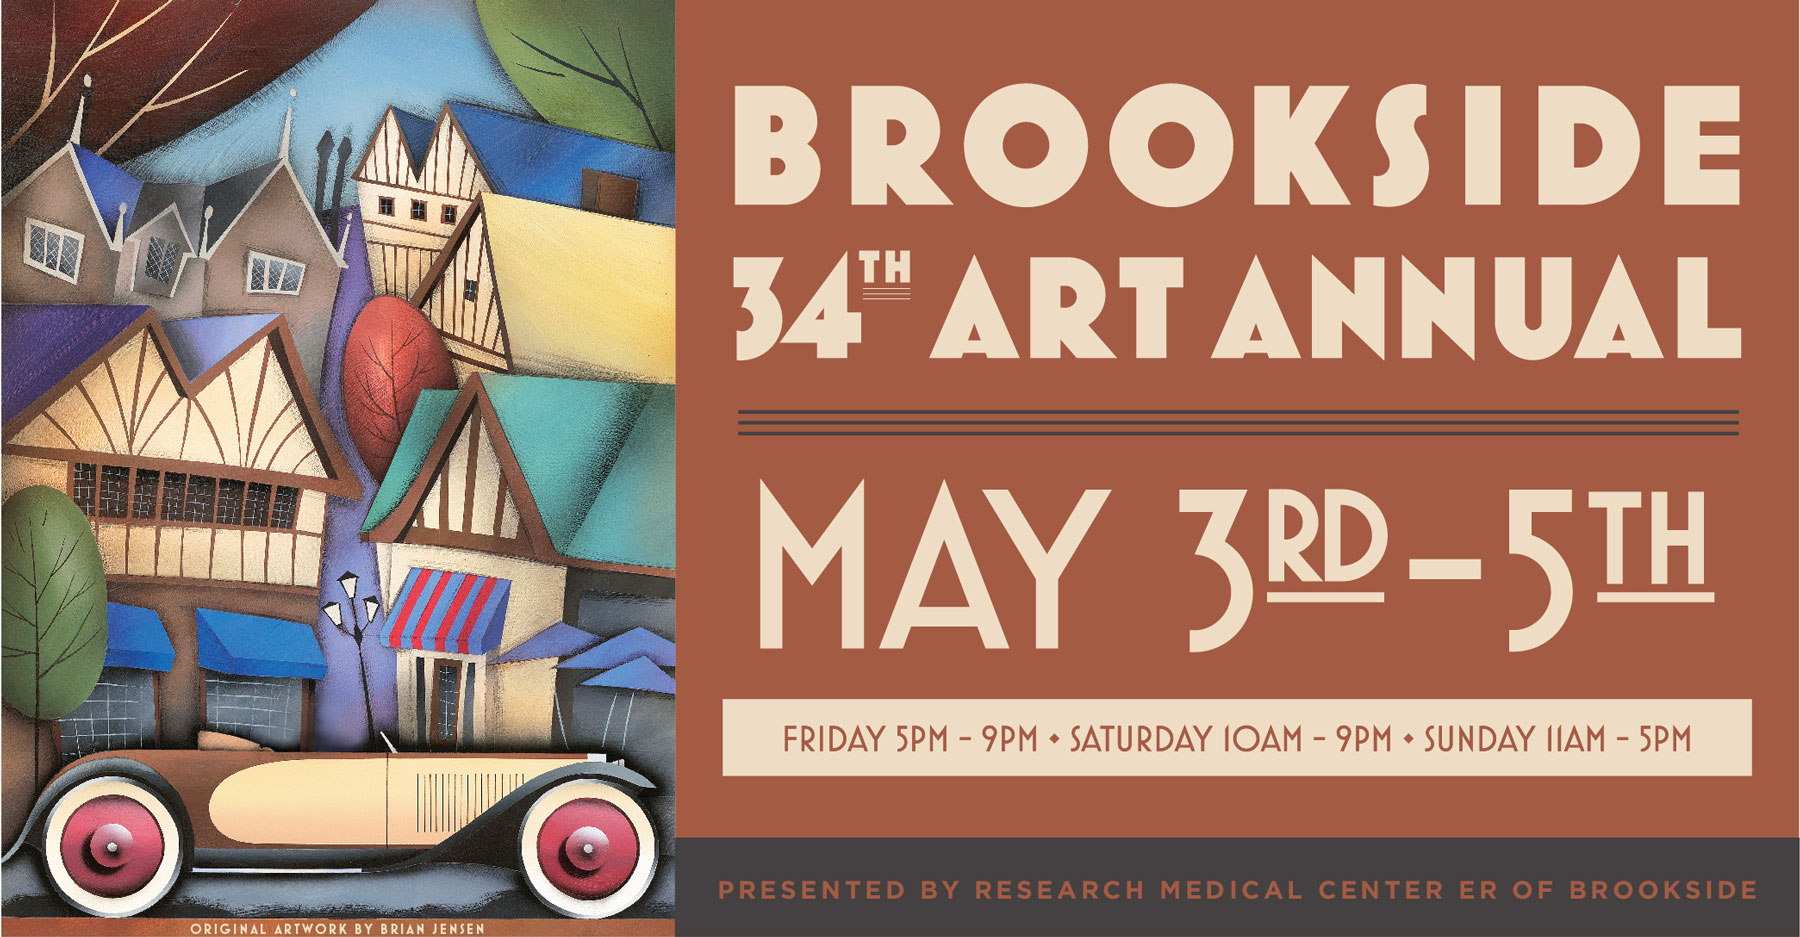 The 34th Brookside Art Annual Returns Next Week with 180 Artists, Local